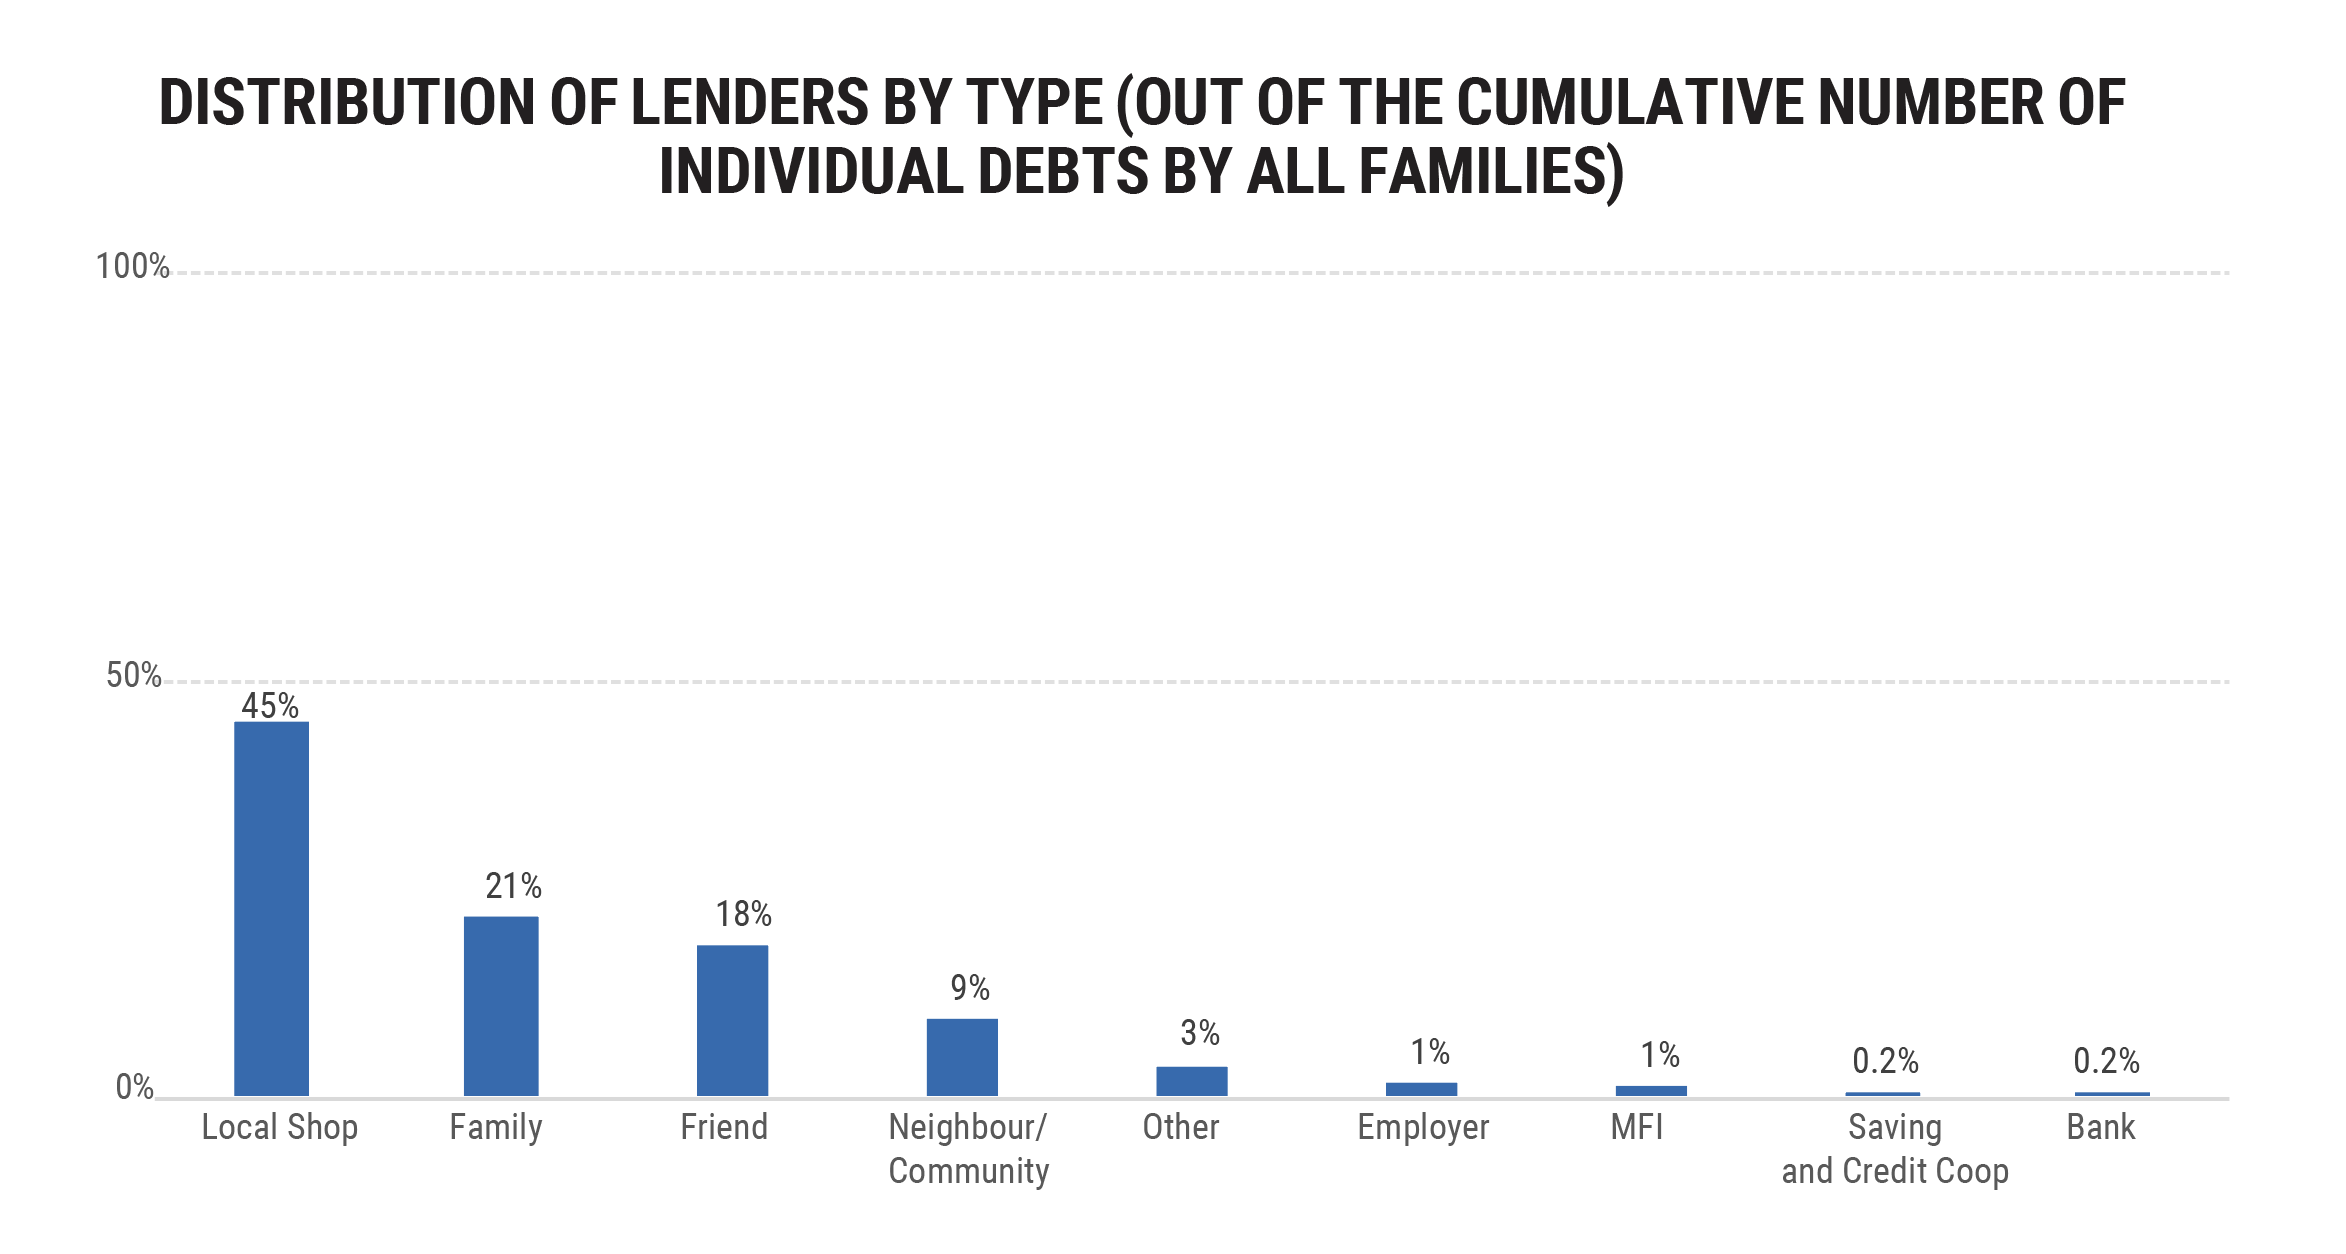 * Out of the cumulative number of individual debts by all families